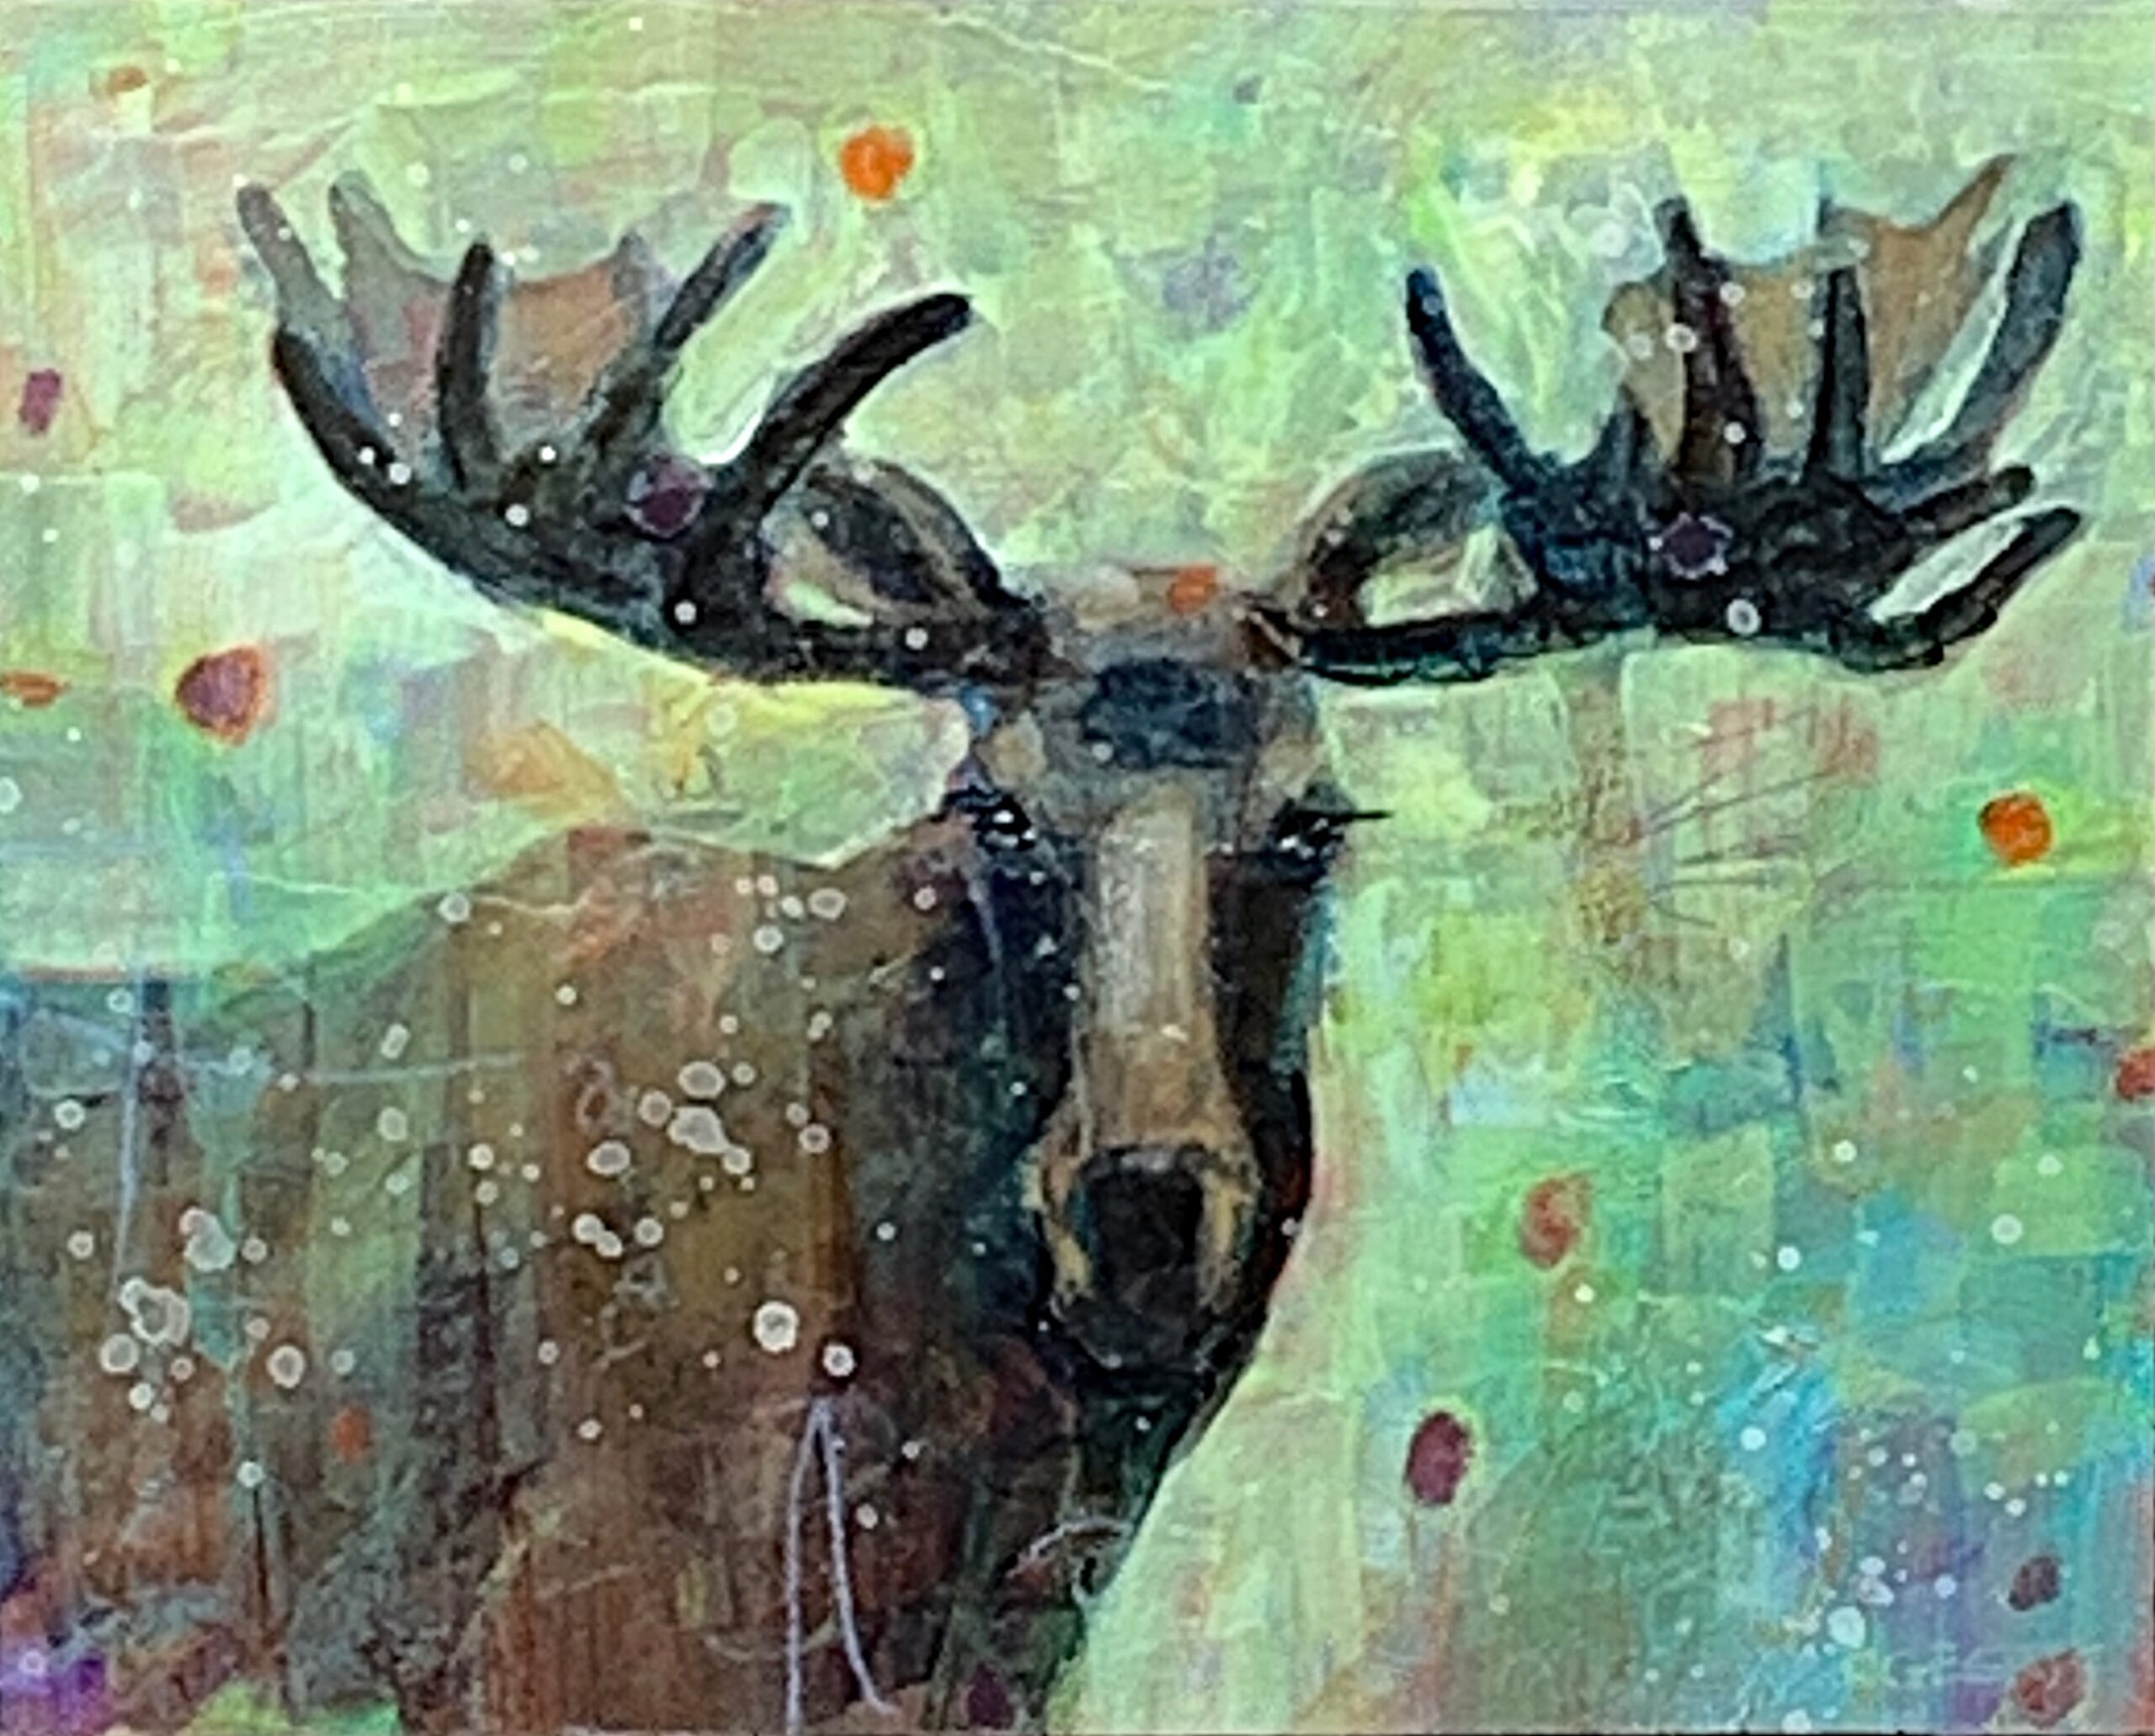 Moose on the Loose, mixed media moose painting by Connie Geerts | Effusion Art Gallery + Cast Glass Studio, Invermere BC